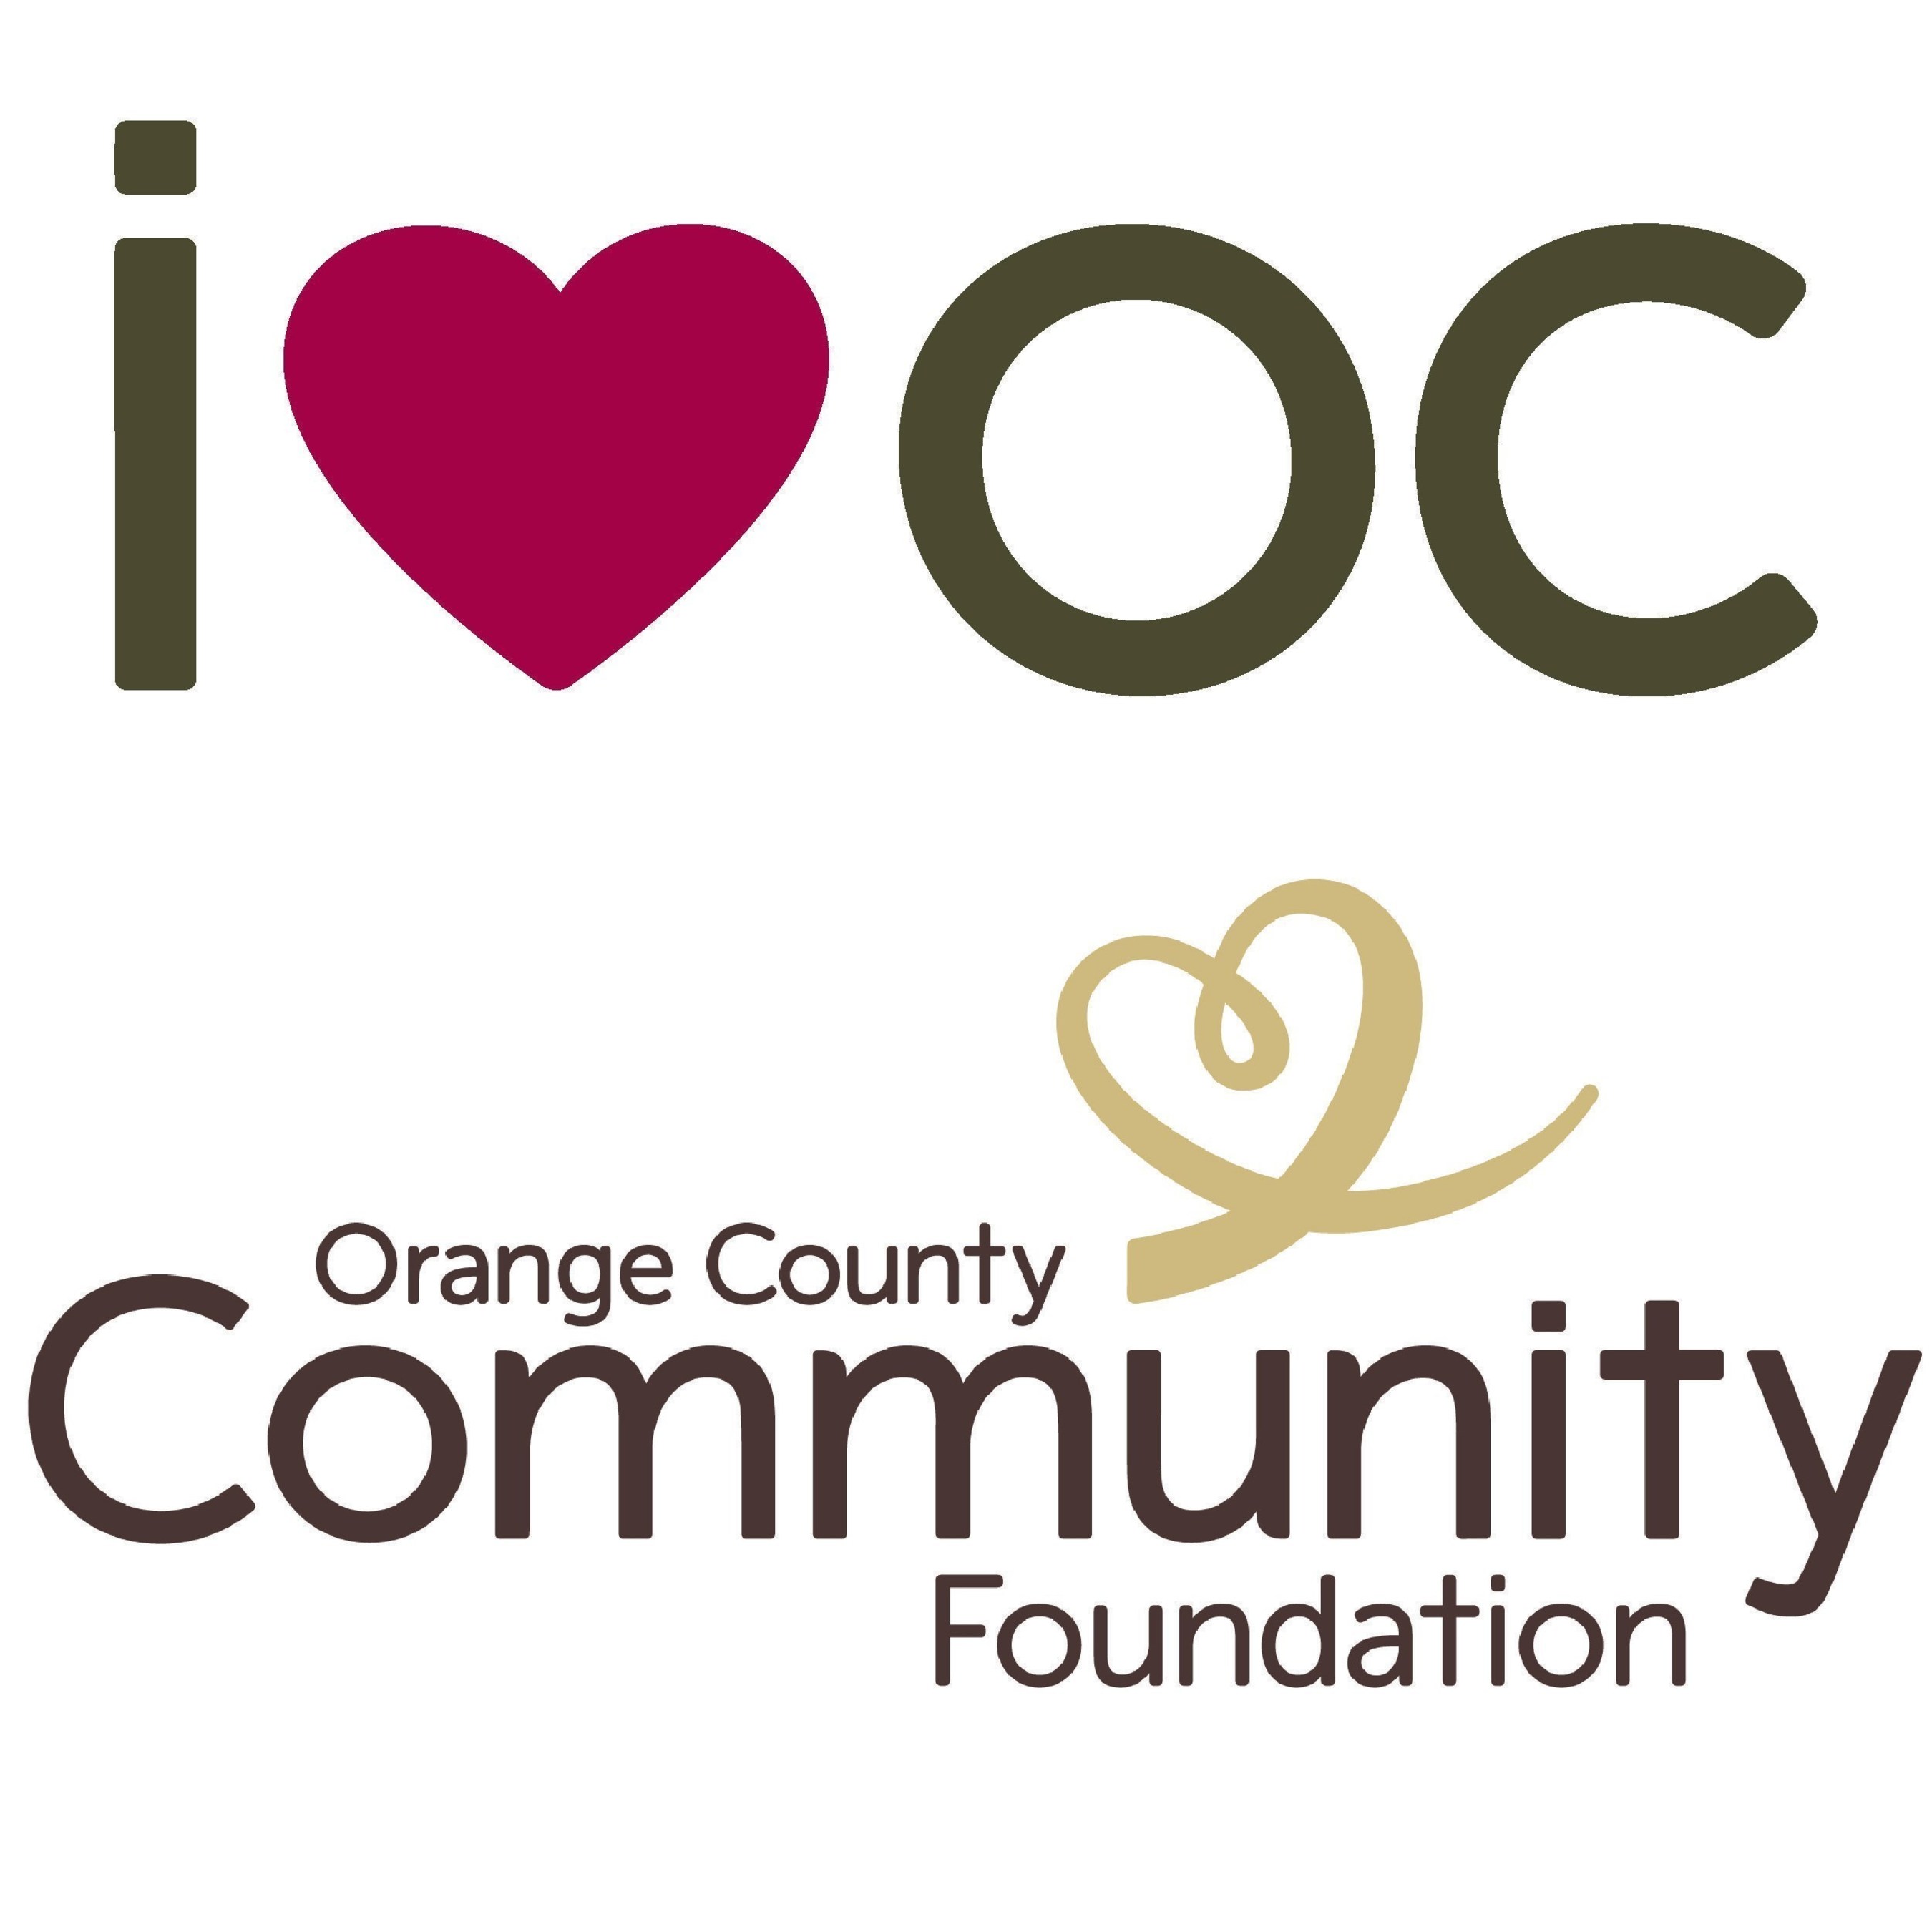 The Orange County Community Foundation is supercharging giving with the 2016 iheartoc Giving Day April 27-28, 2016.